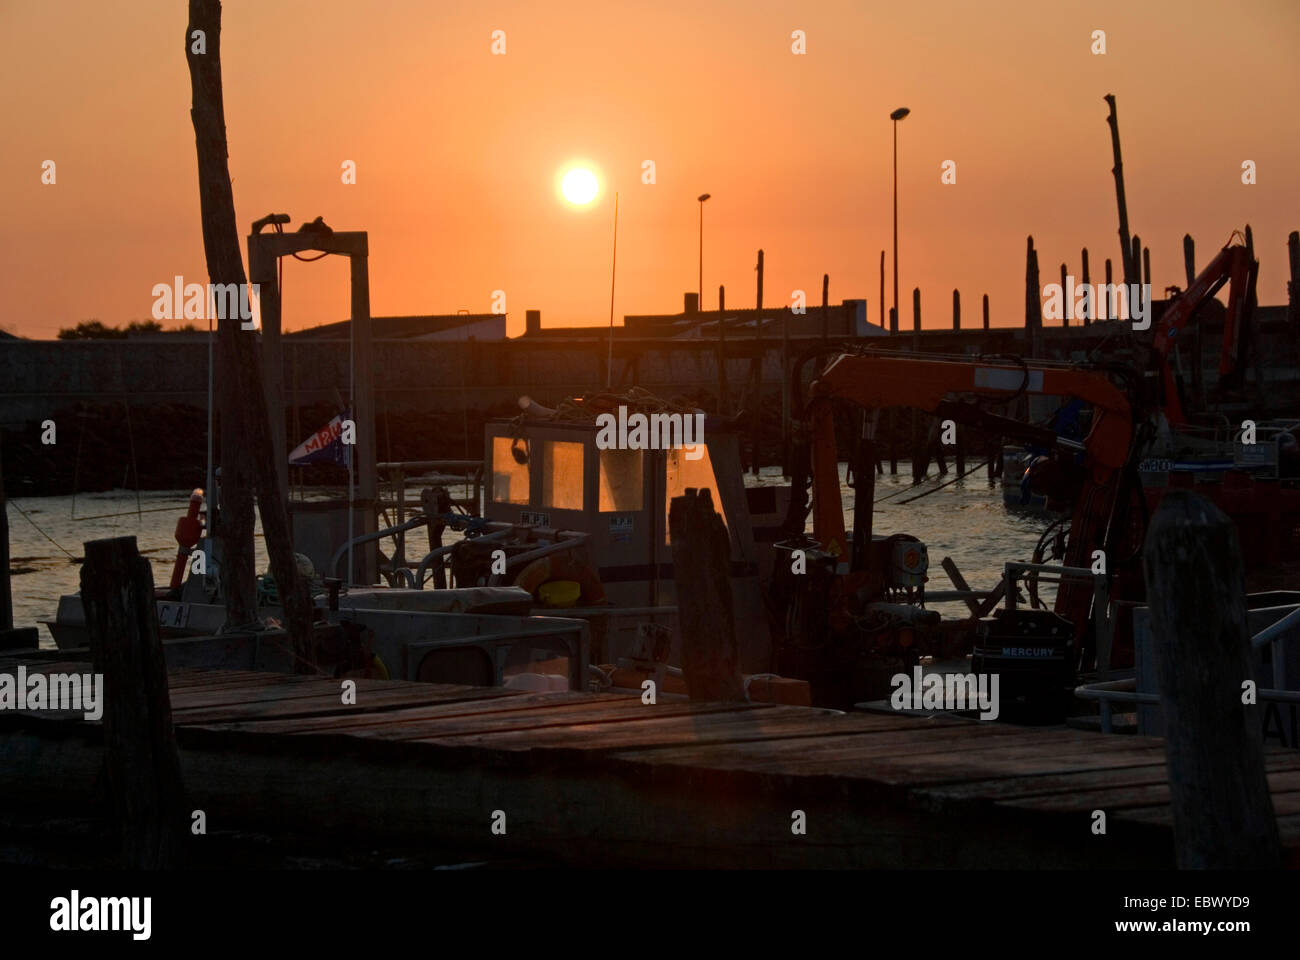 sunset over the little harbour 'Port du Bec' (also called 'Chinese Harbour' for the wooden landing stages)  in the swamp area of Vend�e, France, Vendee, Port du Bec Stock Photo